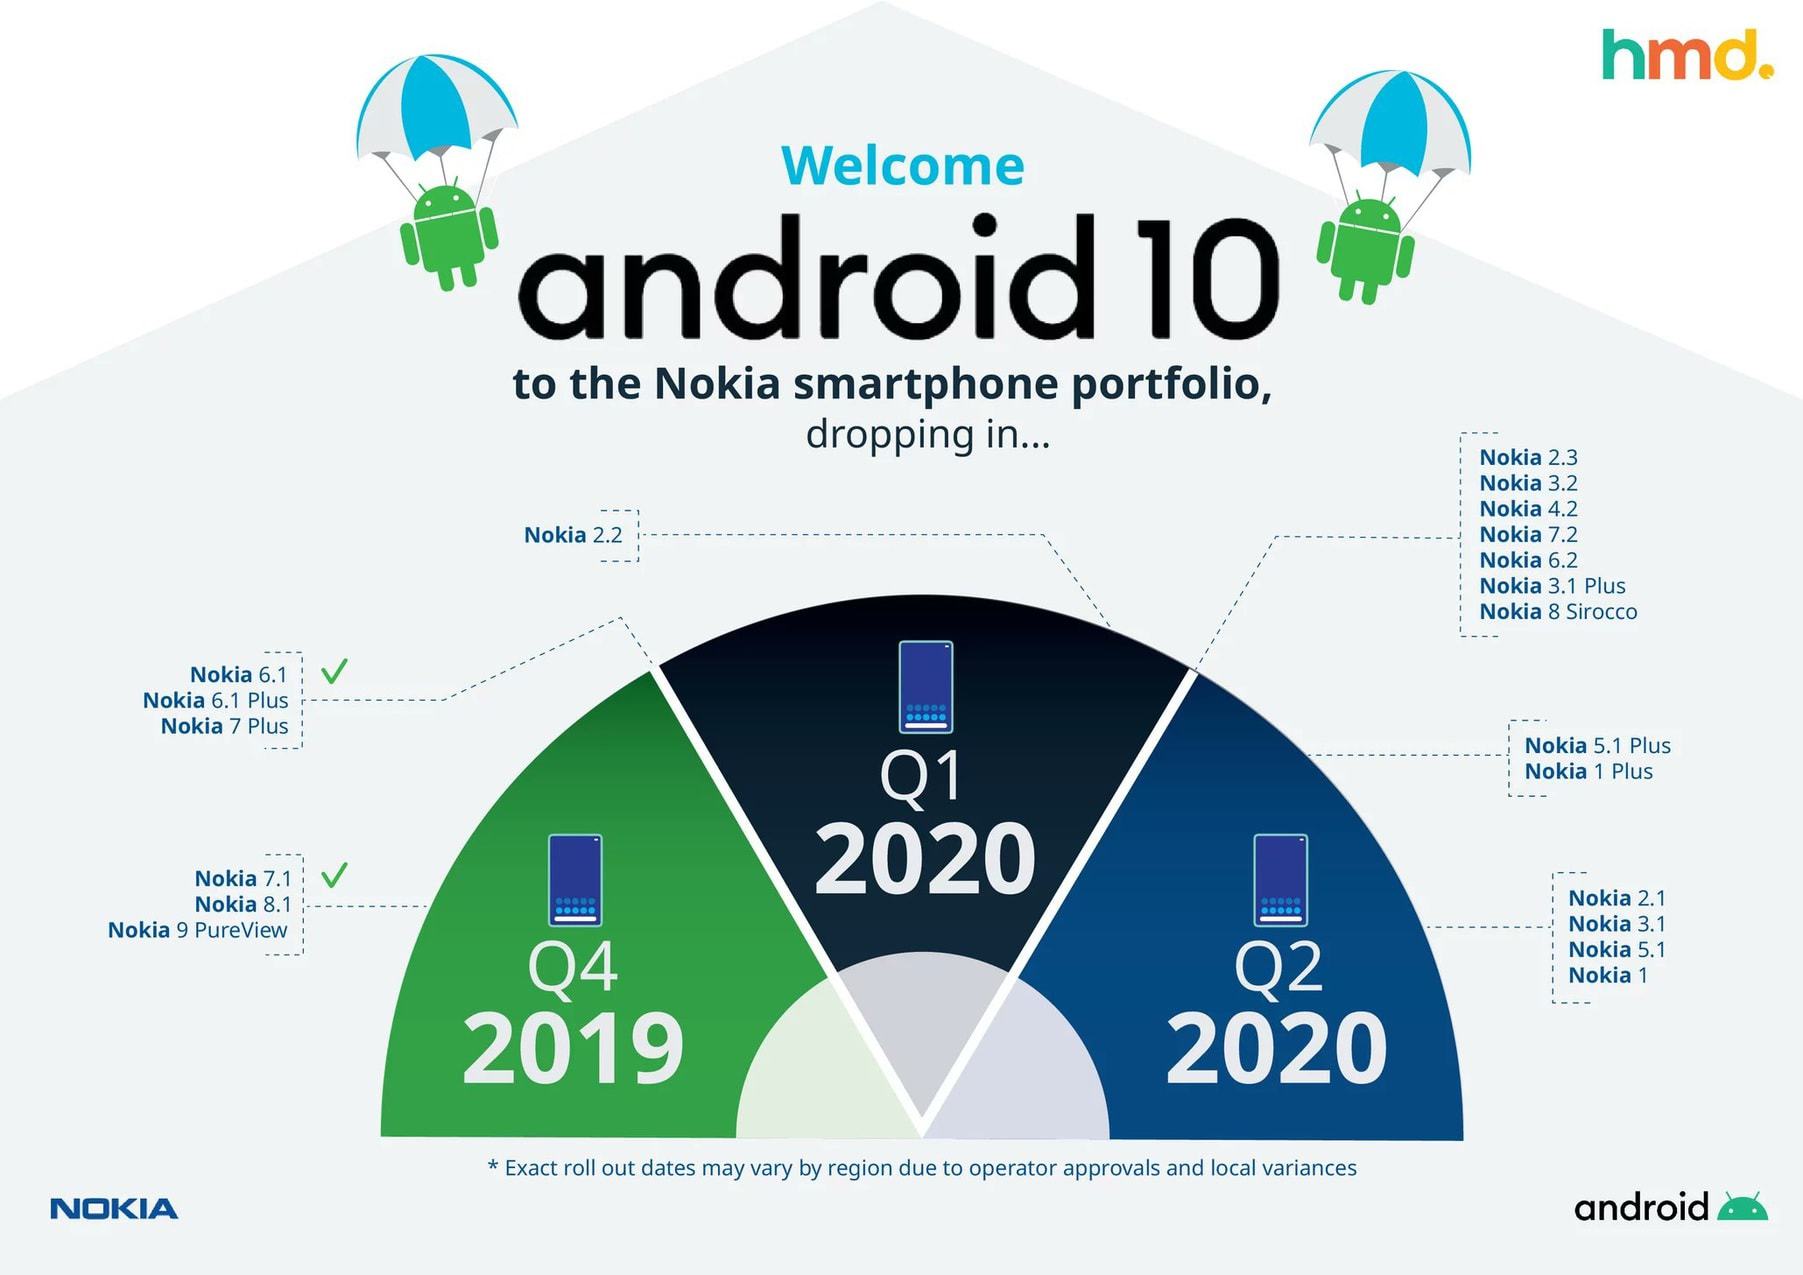 Nokia Android 10 Road Map